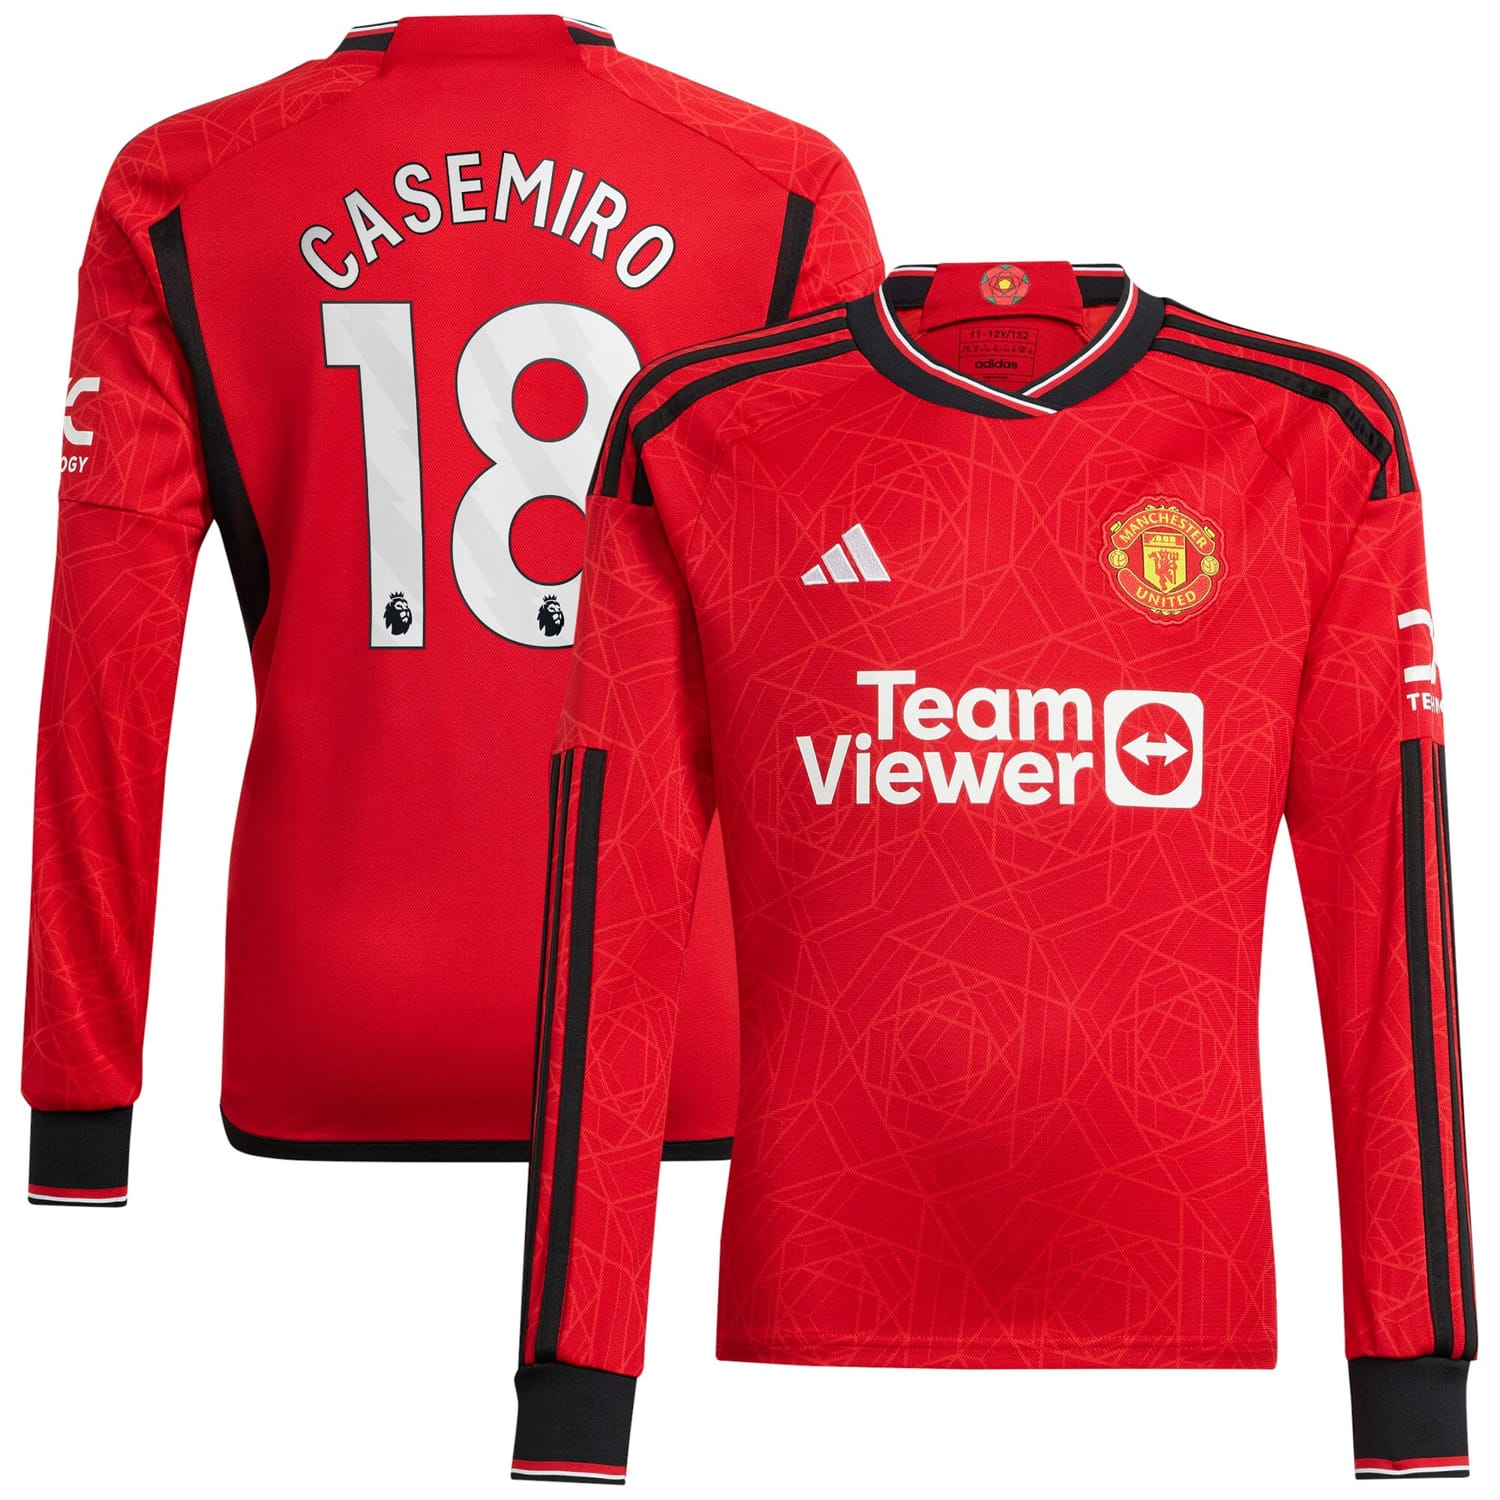 Premier League Manchester United Home Jersey Shirt Long Sleeve Red 2023-24 player Casemiro printing for Men